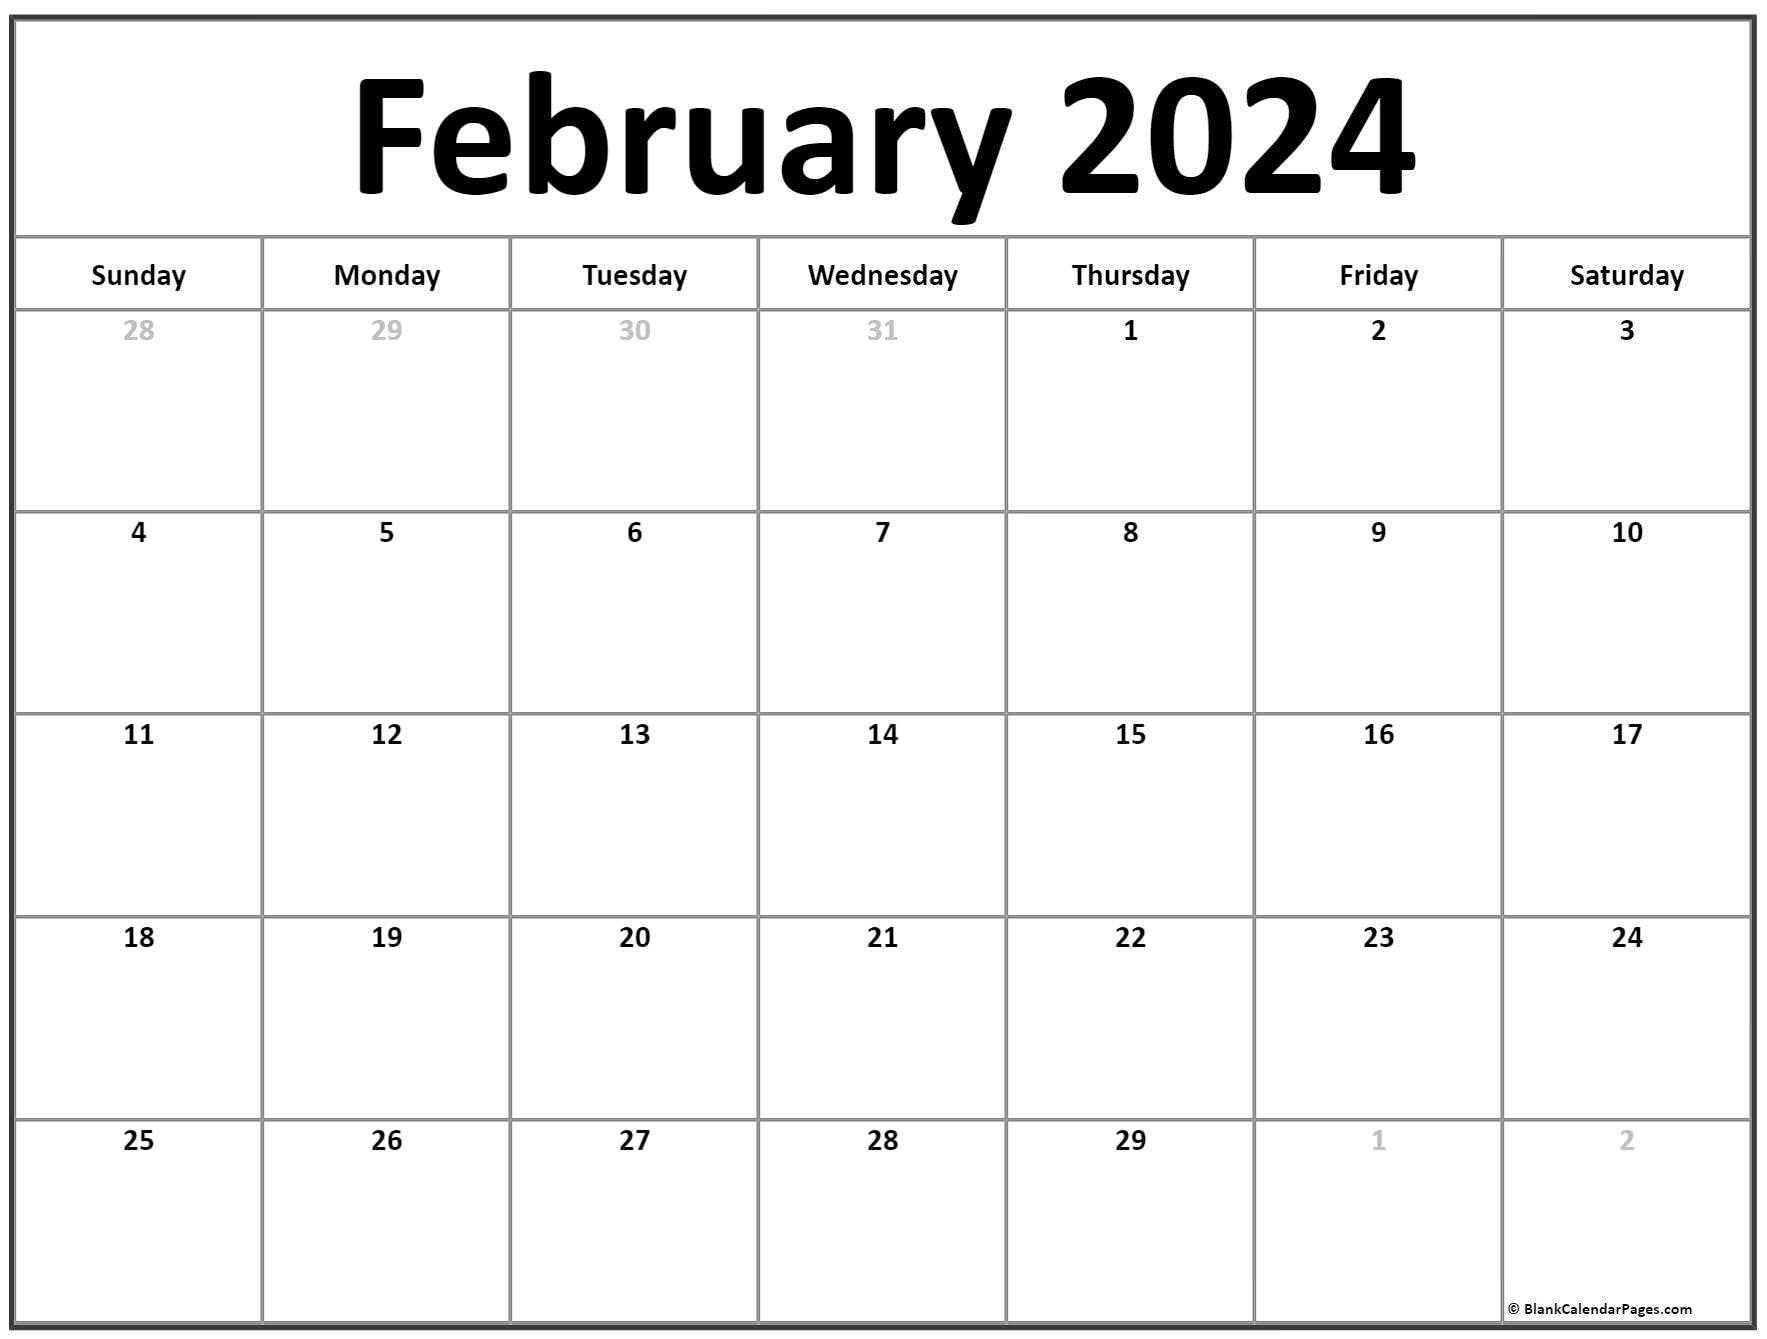 February 2021 Calendar Free Printable Calendar Then print it and post it. https blankcalendarpages com february 2021 calendar